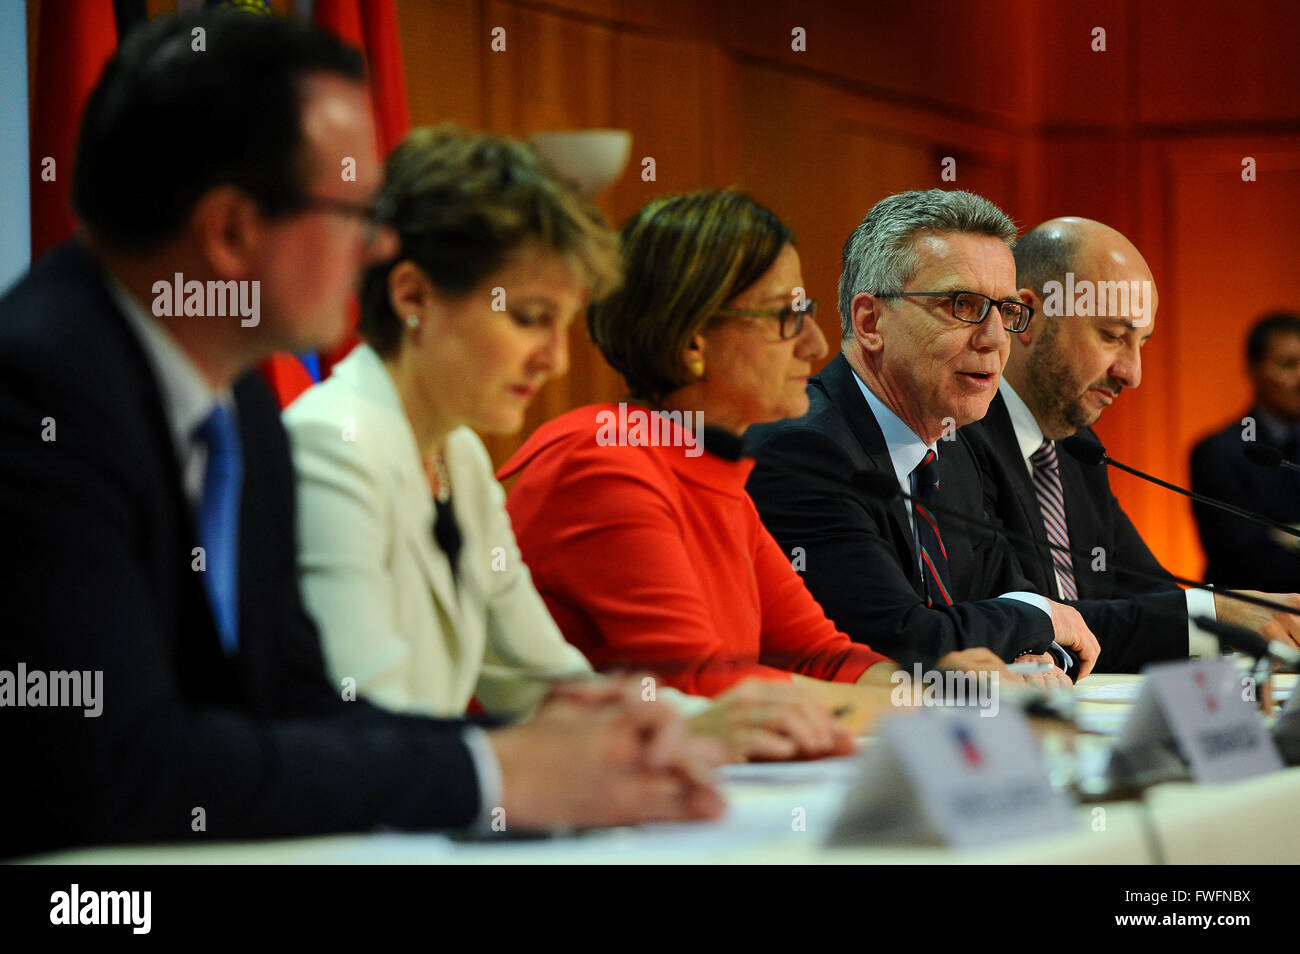 Vienna, Austria. 5th Apr, 2016. (L-R) Deputy Prime Minister of Liechtenstein Thomas Zwiefelhofer, Swiss Justice Minister Simonetta Sommaruga, Austrian Interior Minister Johanna Mikl-Leitner, German Interior Minister Thomas de Maiziere and Luxembourg Minister of Interior Security Etienne Schneider attend a press conference after a meeting in Vienna, Austria, April 5, 2016. The officials held a meeting in Vienna on Tuesday to discuss issues related to refugees. © Qian Yi/Xinhua/Alamy Live News Stock Photo